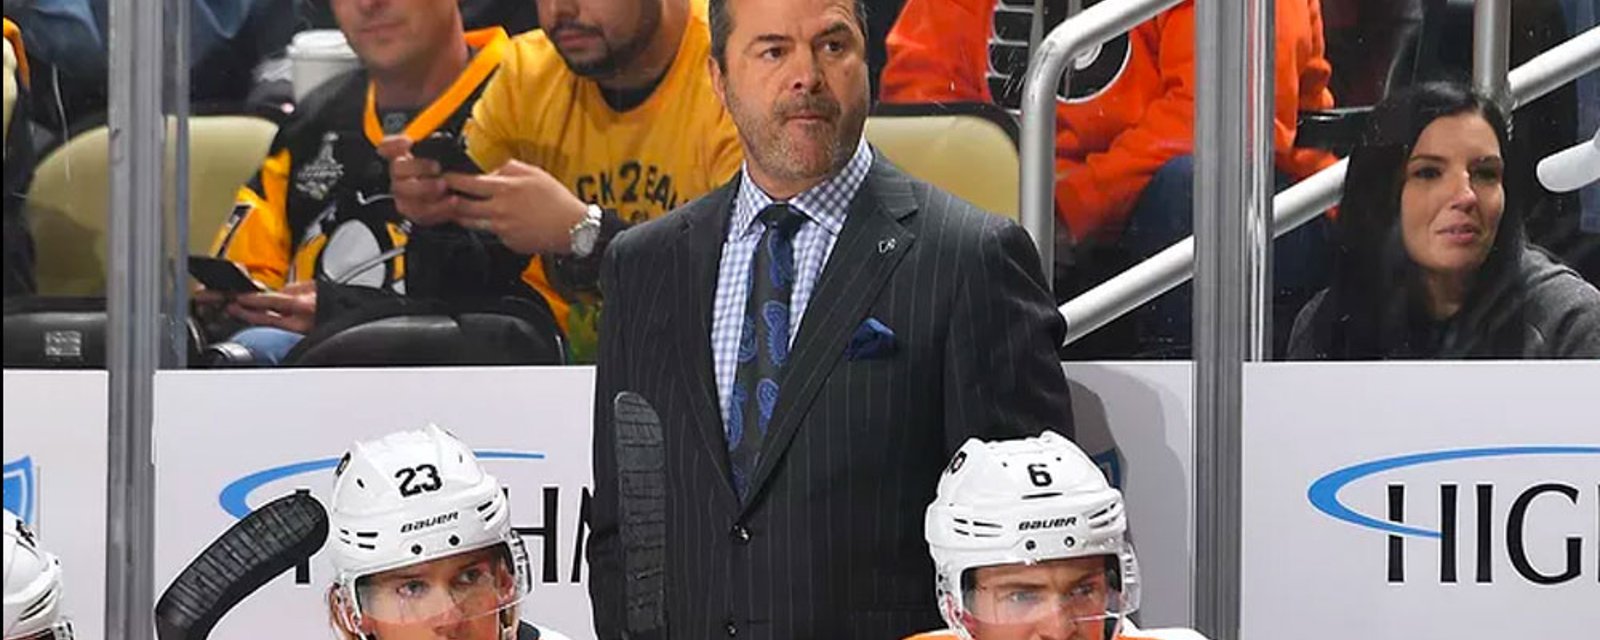 Vigneault rips Flyers after embarrassing loss to Penguins, threatens major changes